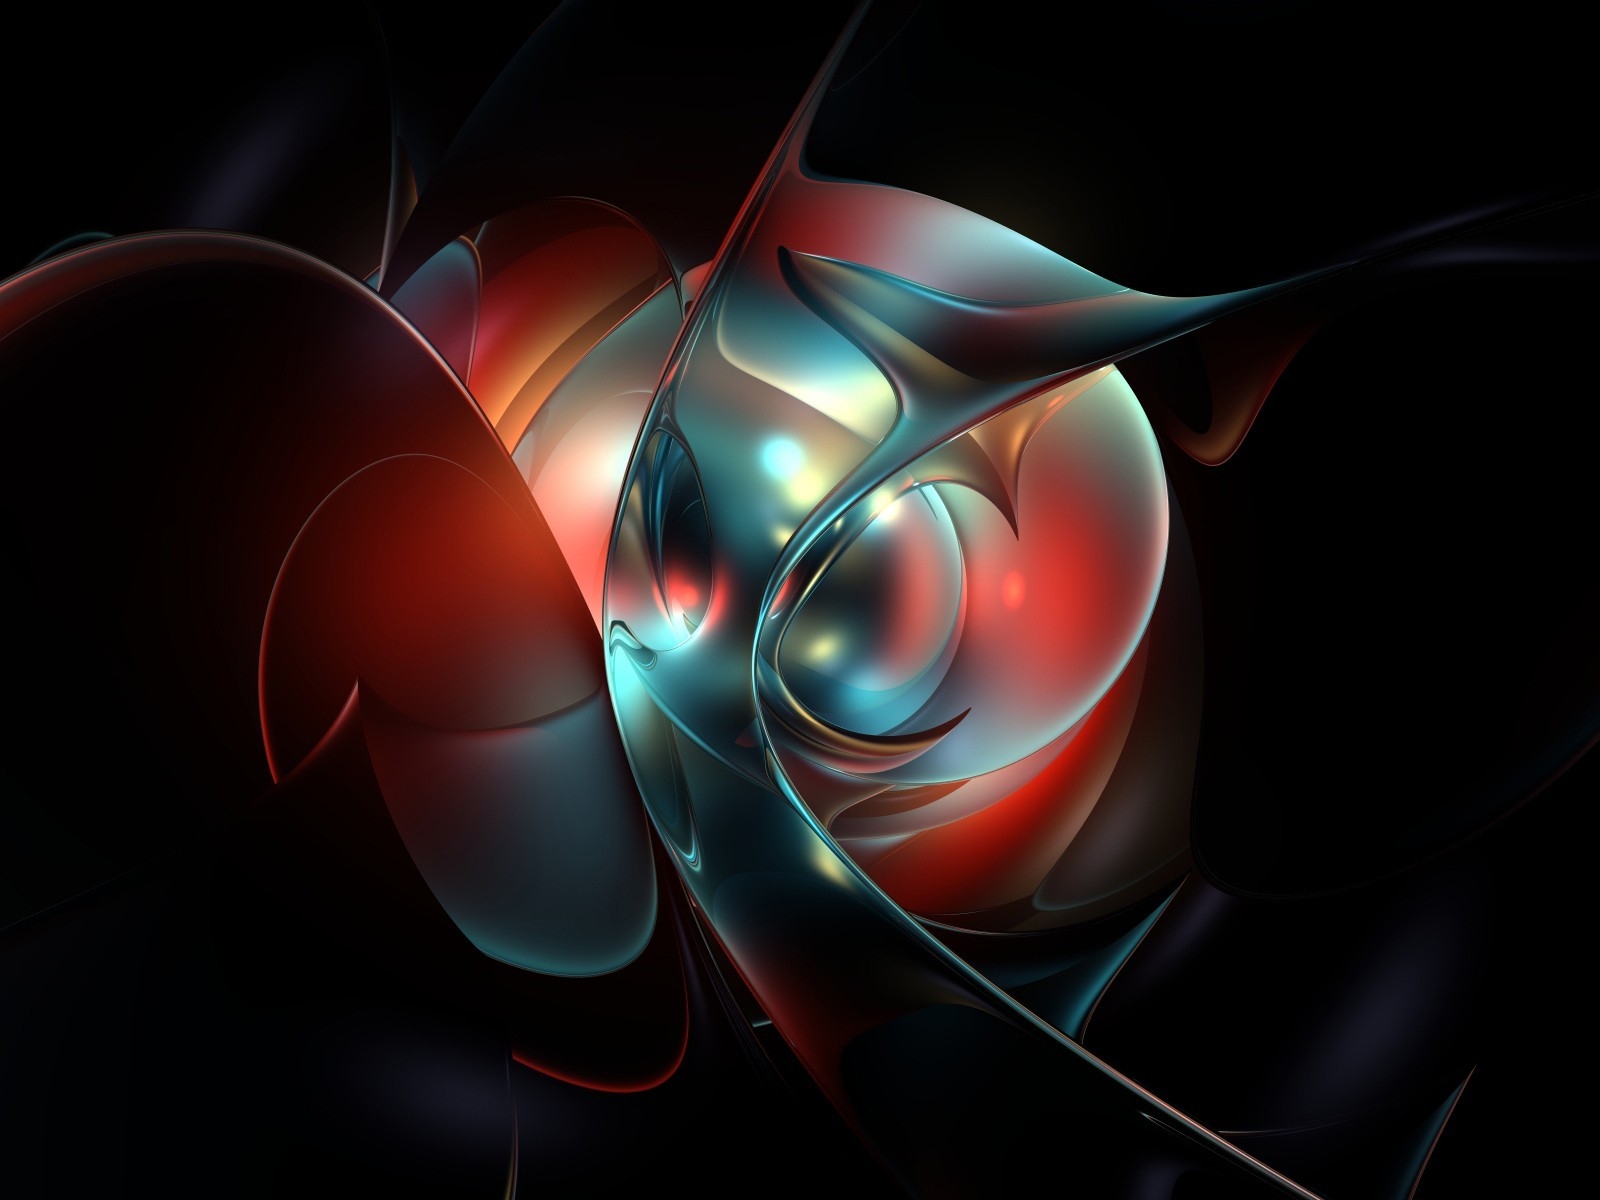 Abstract Geometric Shapes for 1600 x 1200 resolution